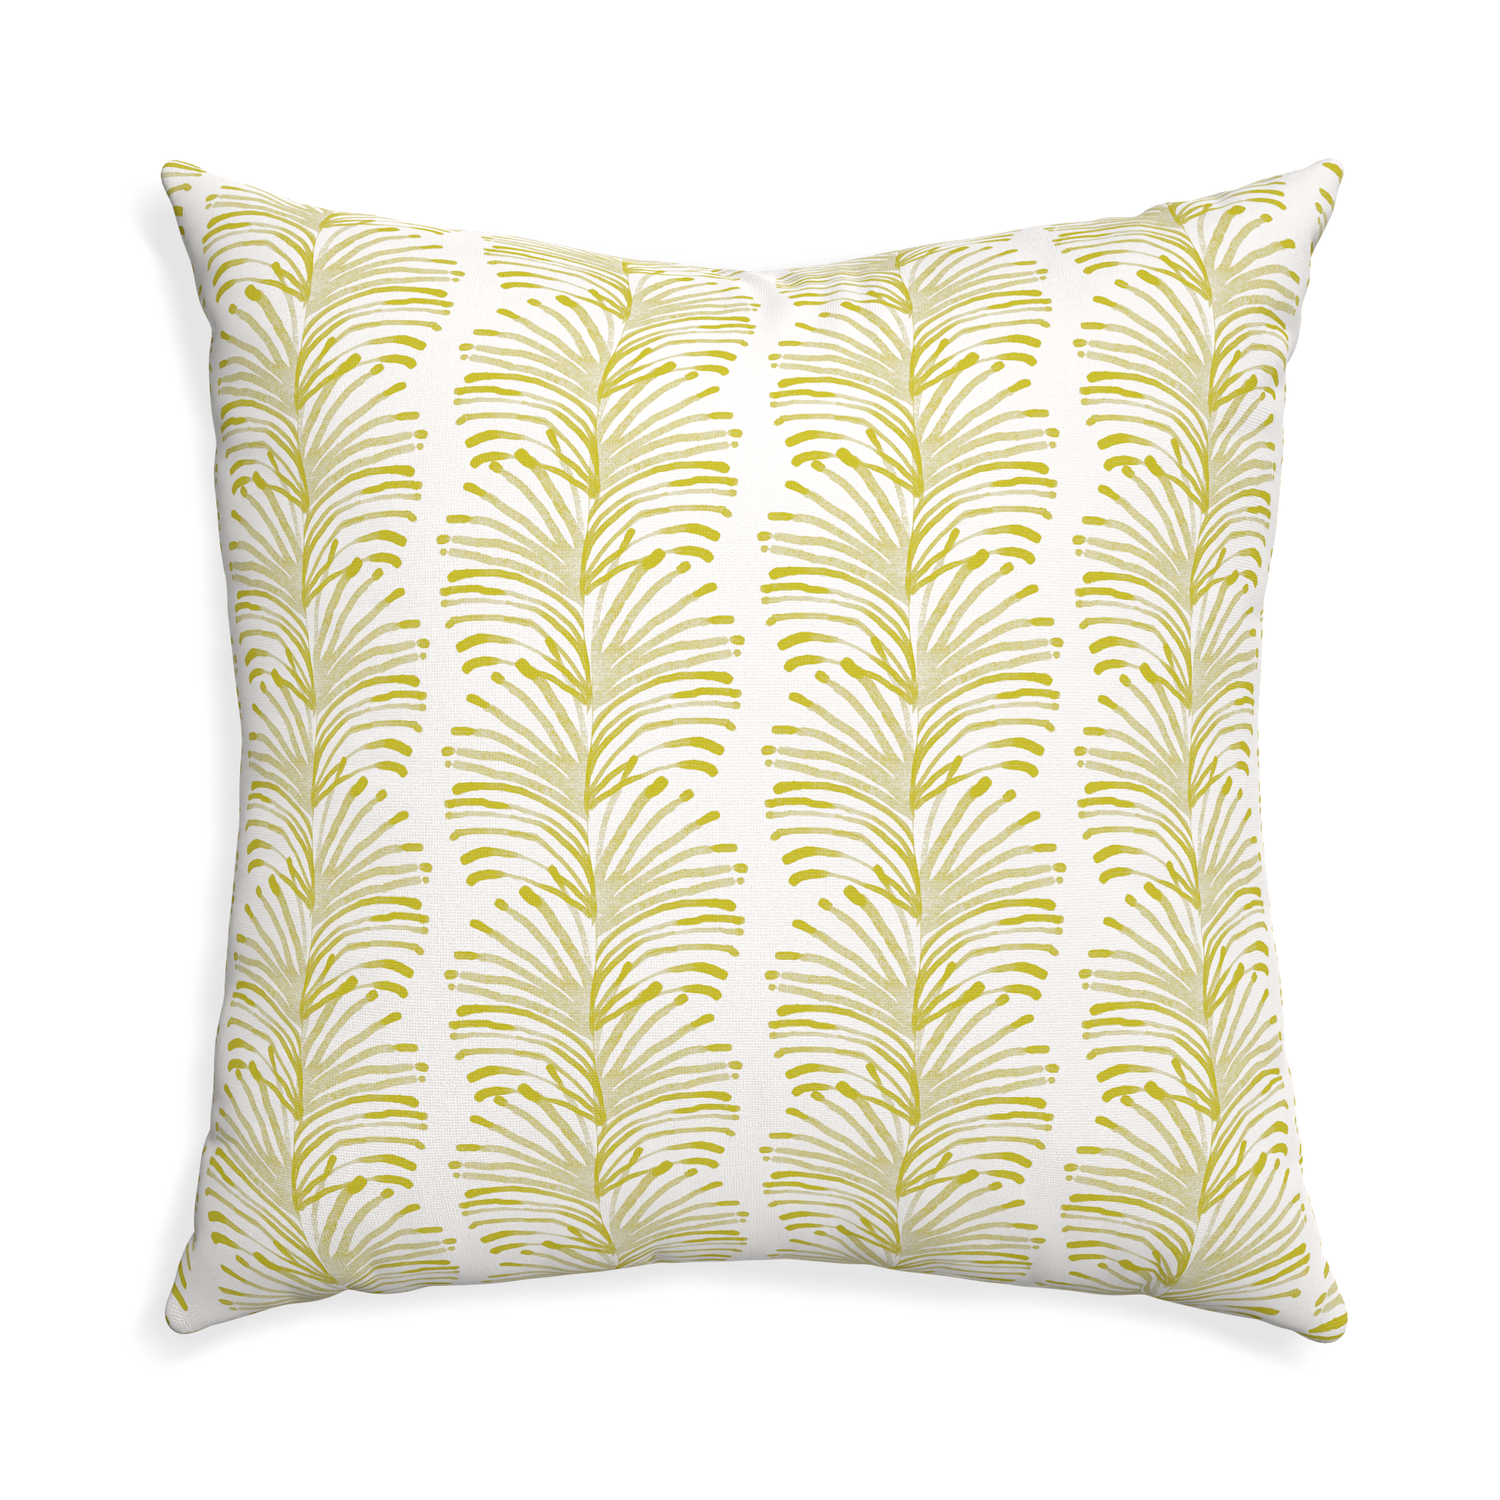 Euro-sham emma chartreuse custom yellow stripe chartreusepillow with none on white background